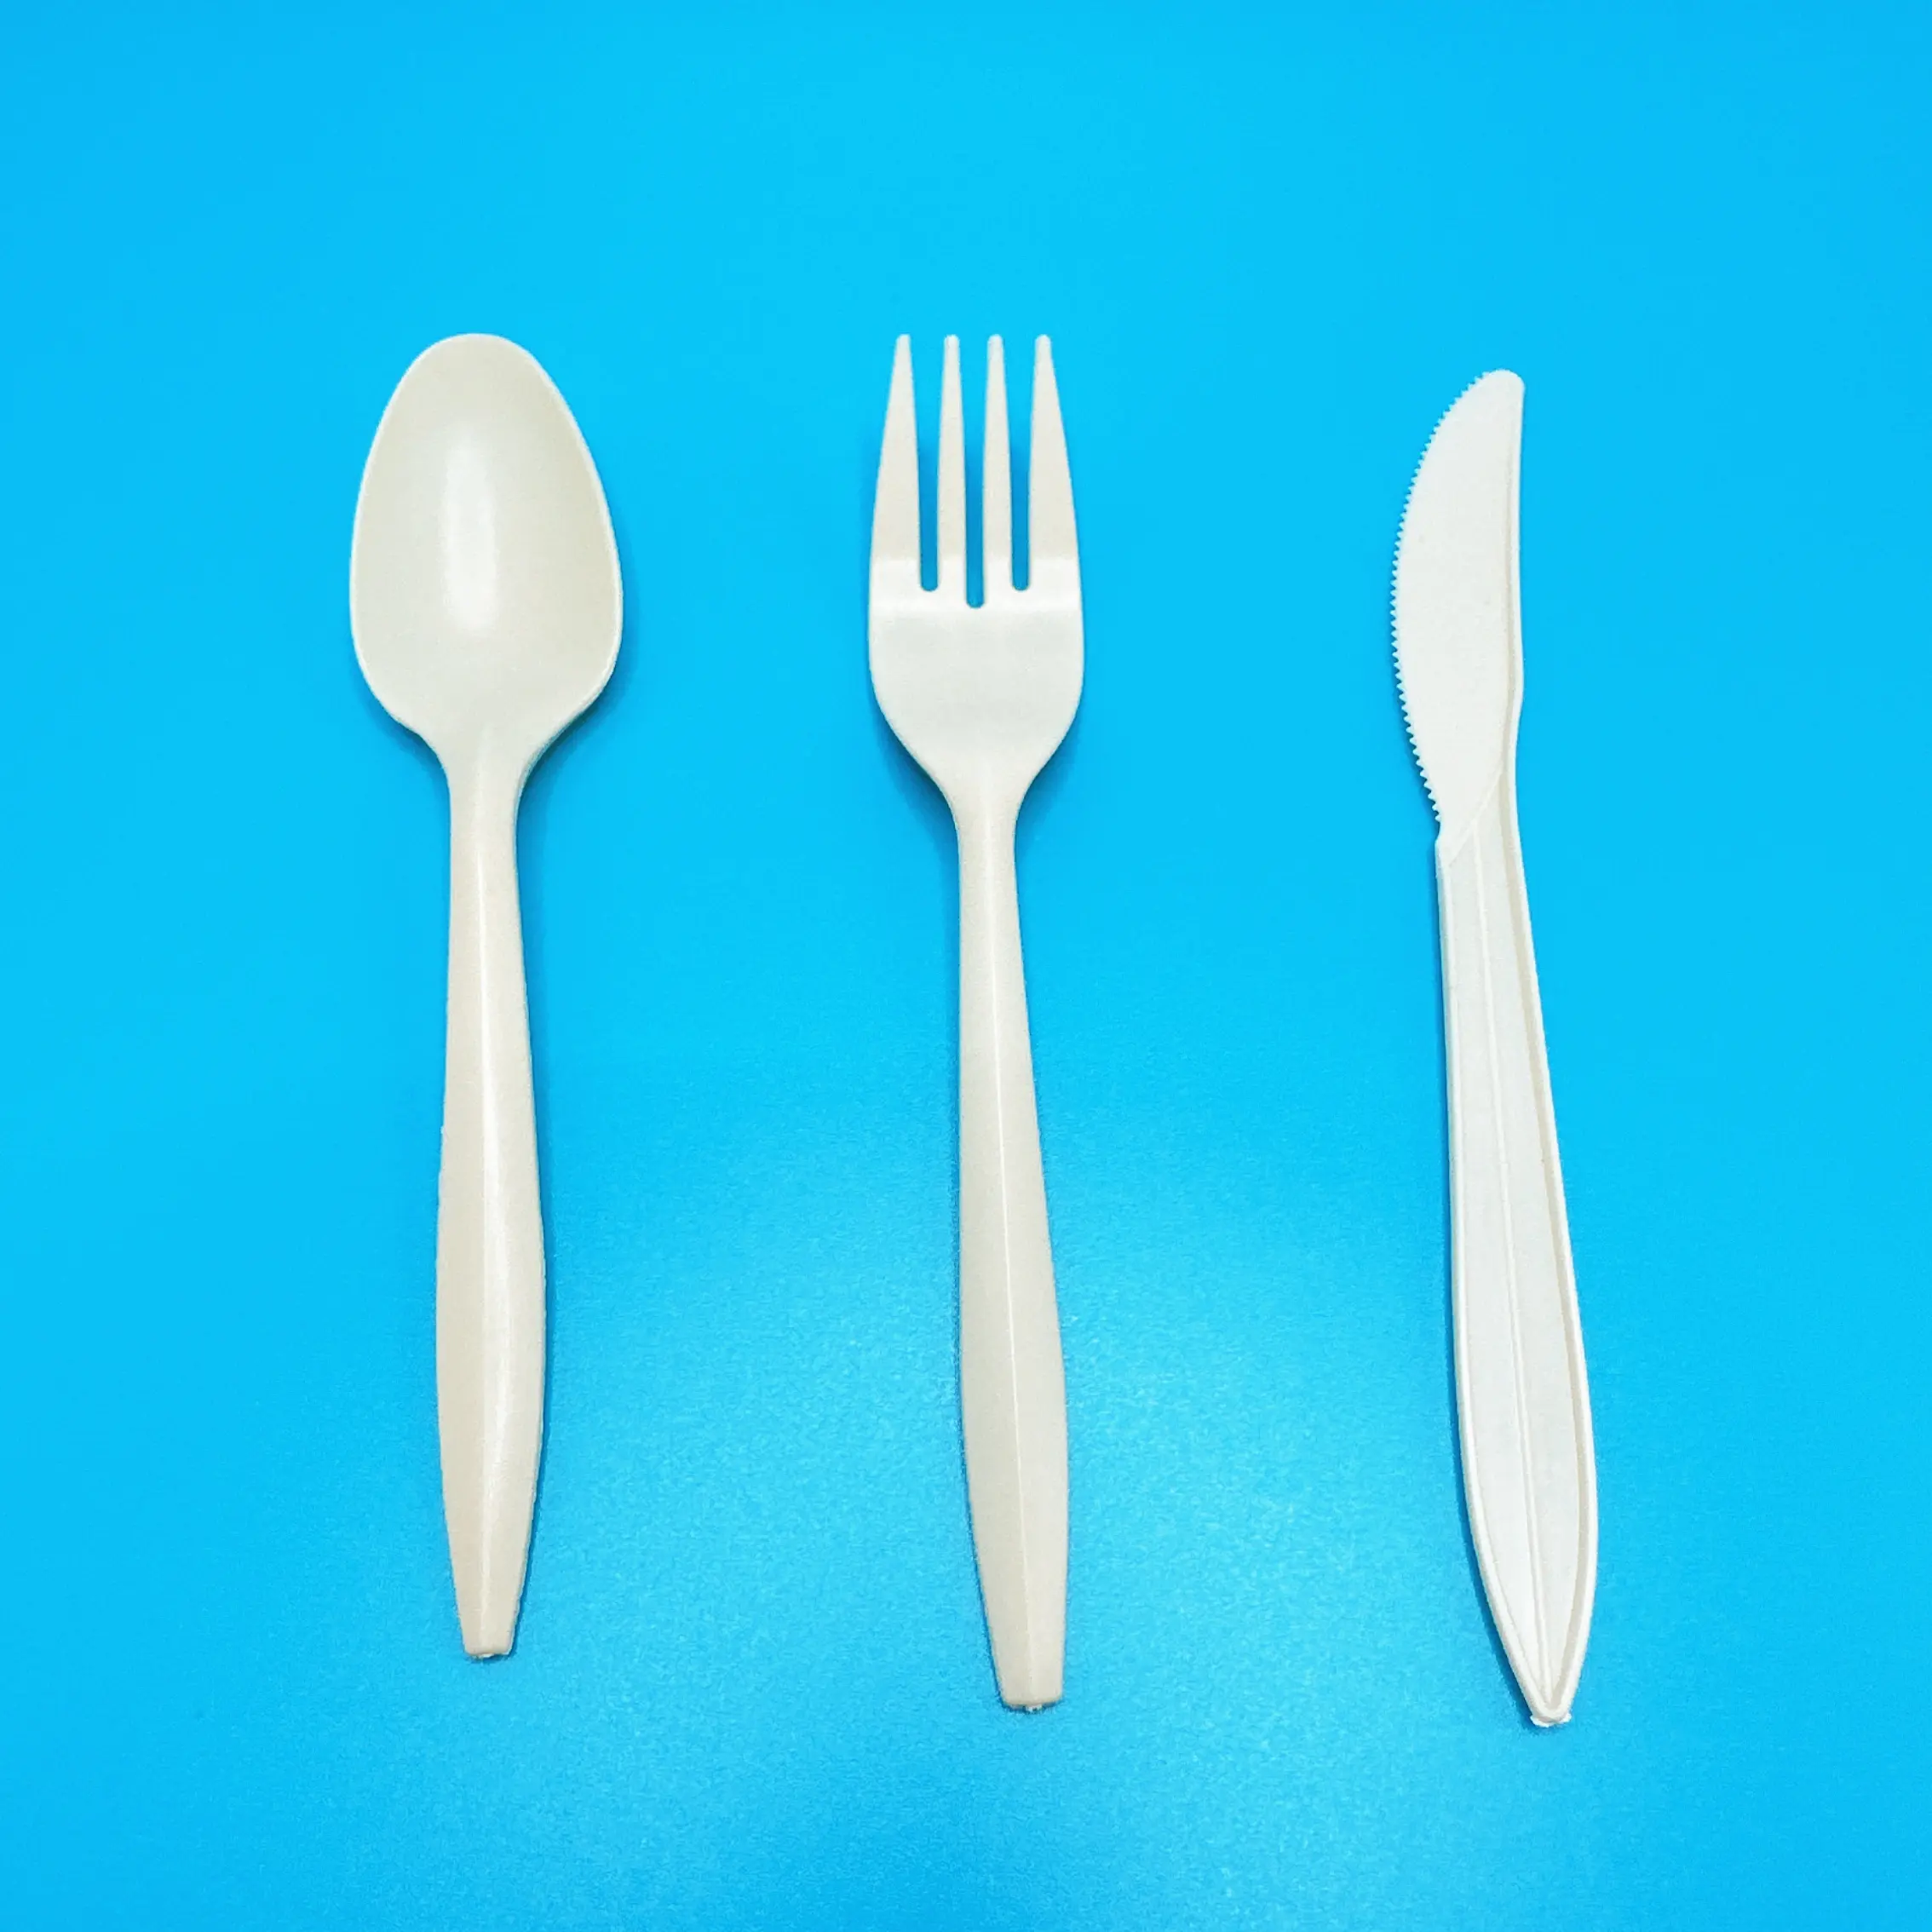 Take Out Wrapped PS Plastic Forks Spoons And Knives Disposable Plastic Cutlery Sets With Napkin Packets